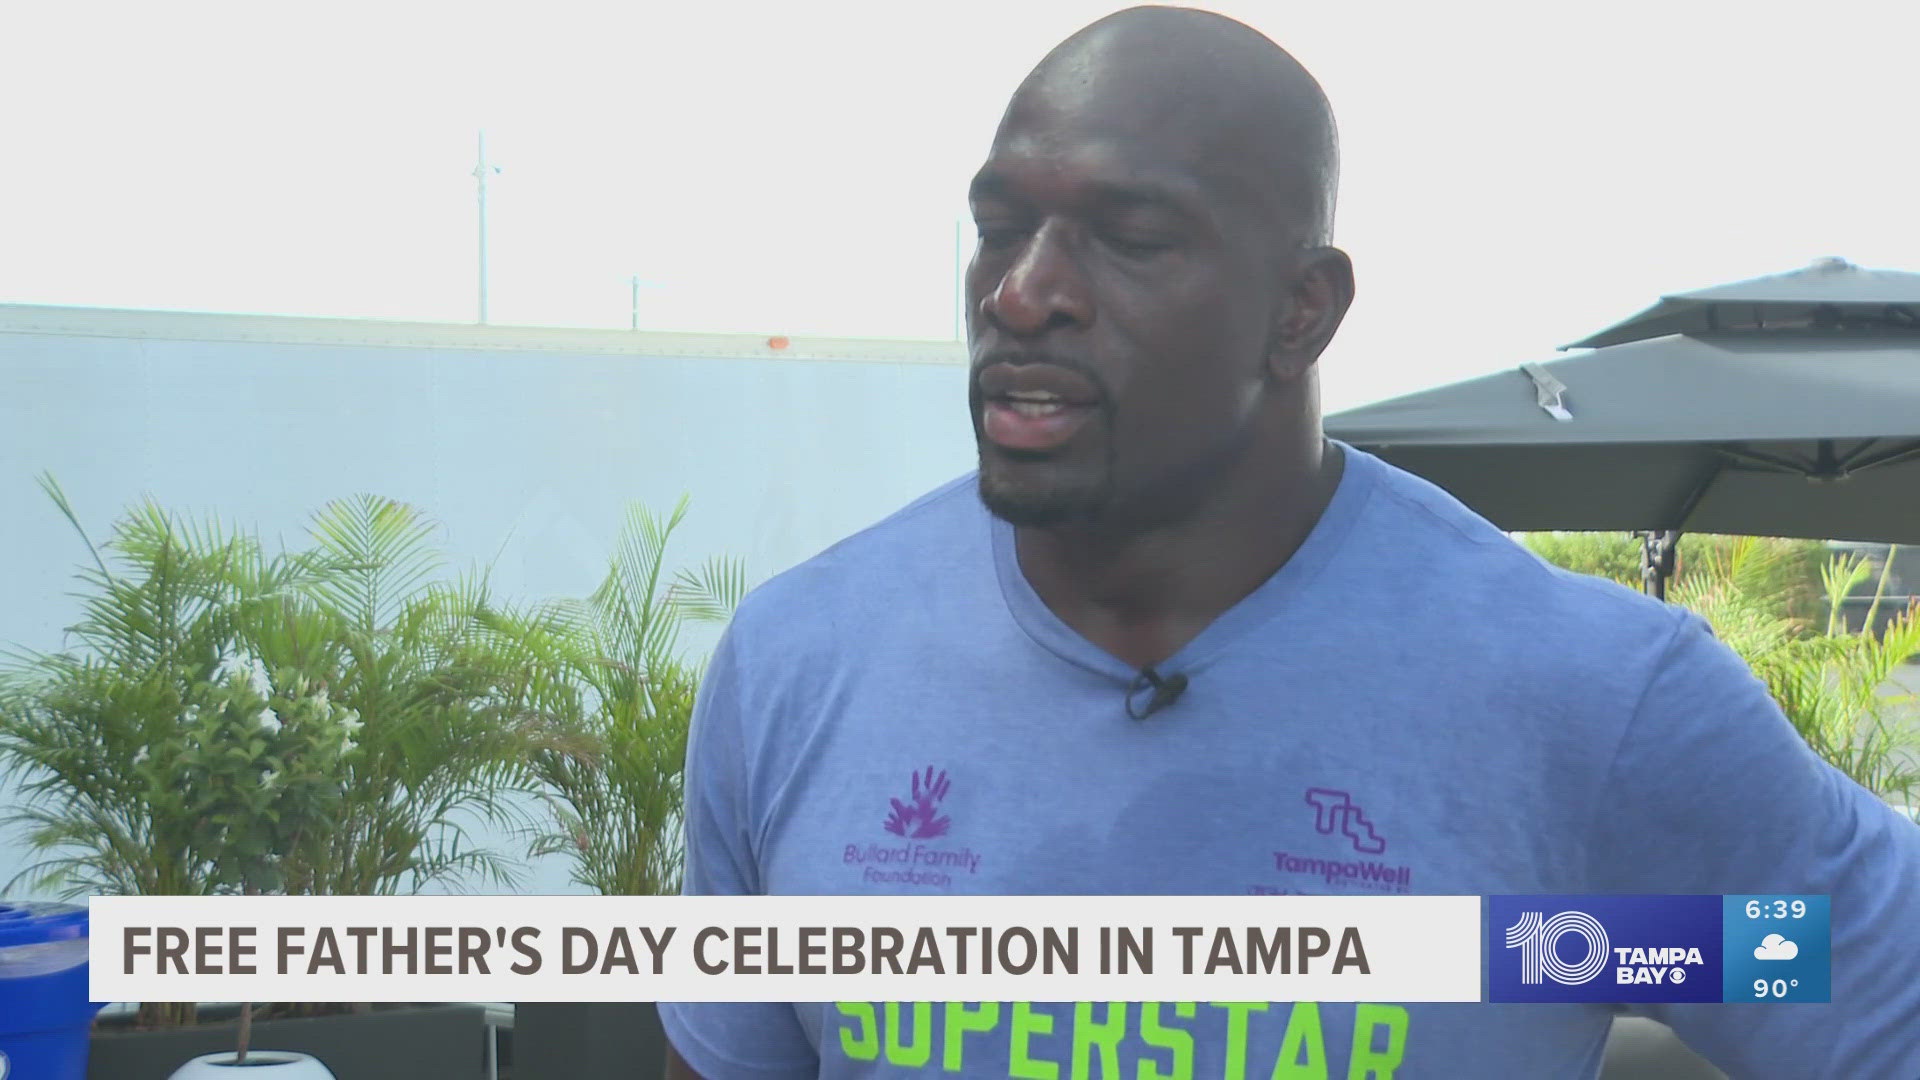 Wrestling legend Titus O'Neil says fatherhood "is the greatest title in the world."